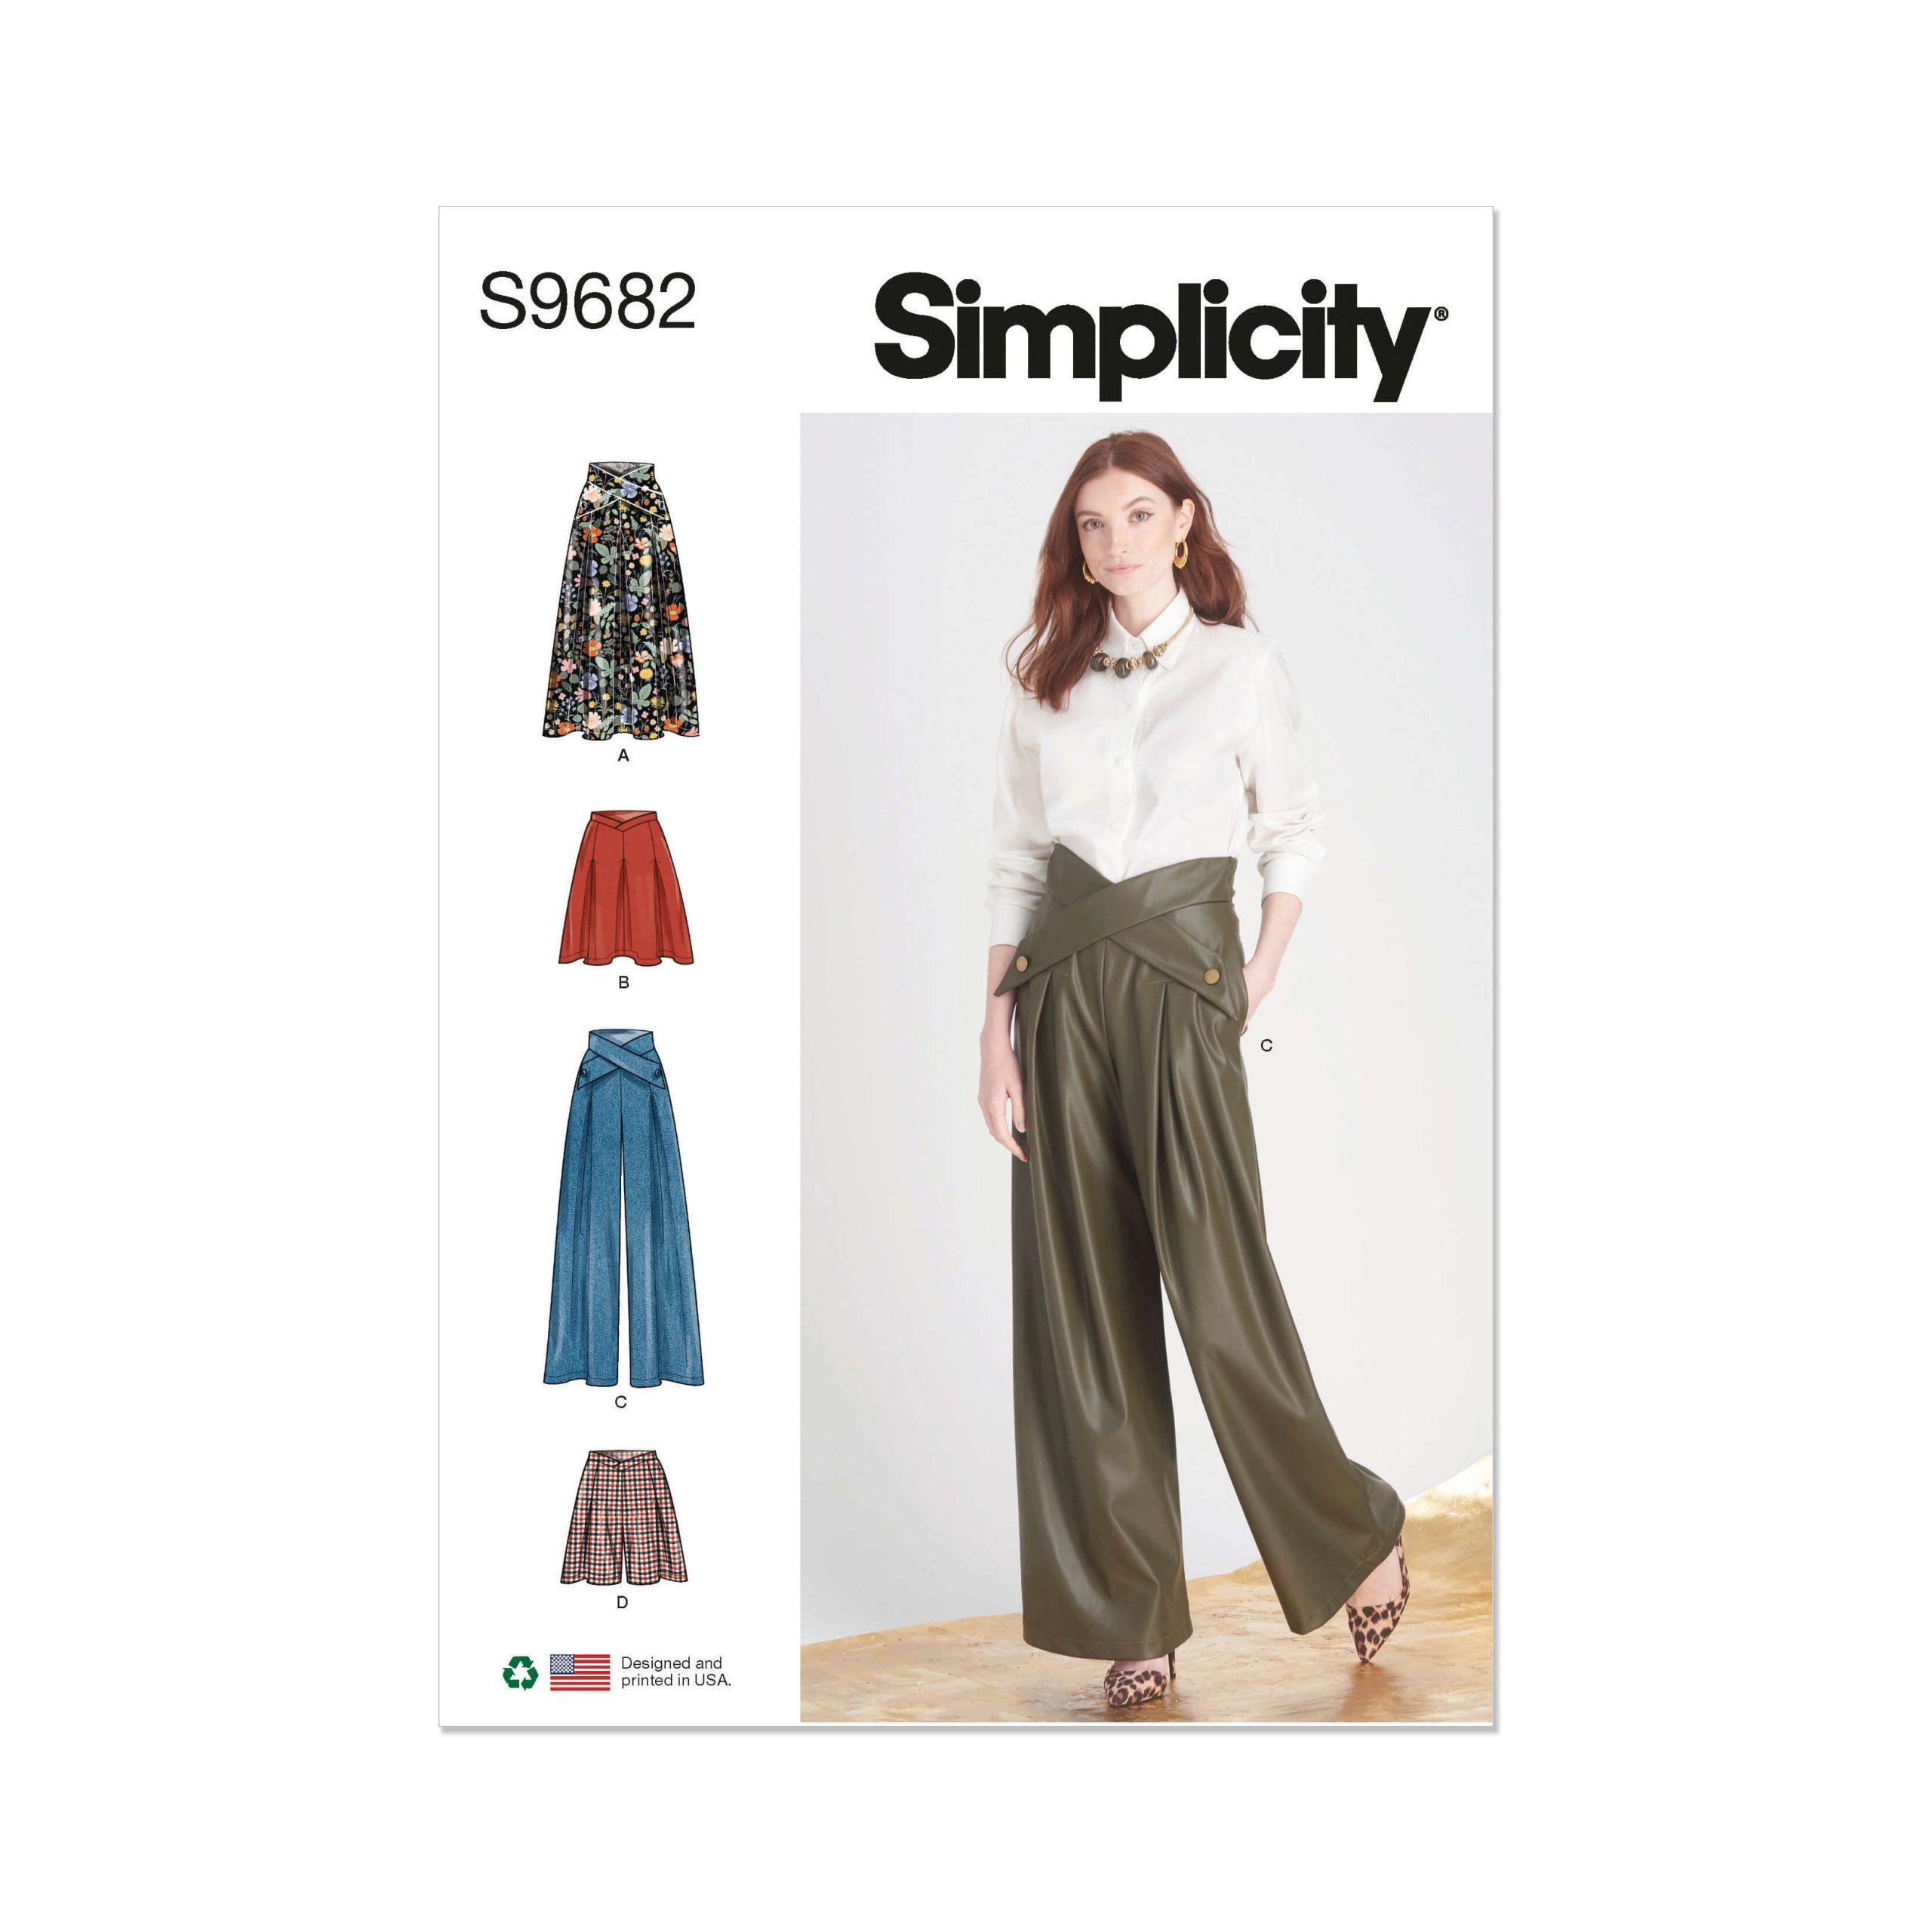 Simplicity Sewing Pattern S9682 Misses' Skirts, Trousers, and Shorts